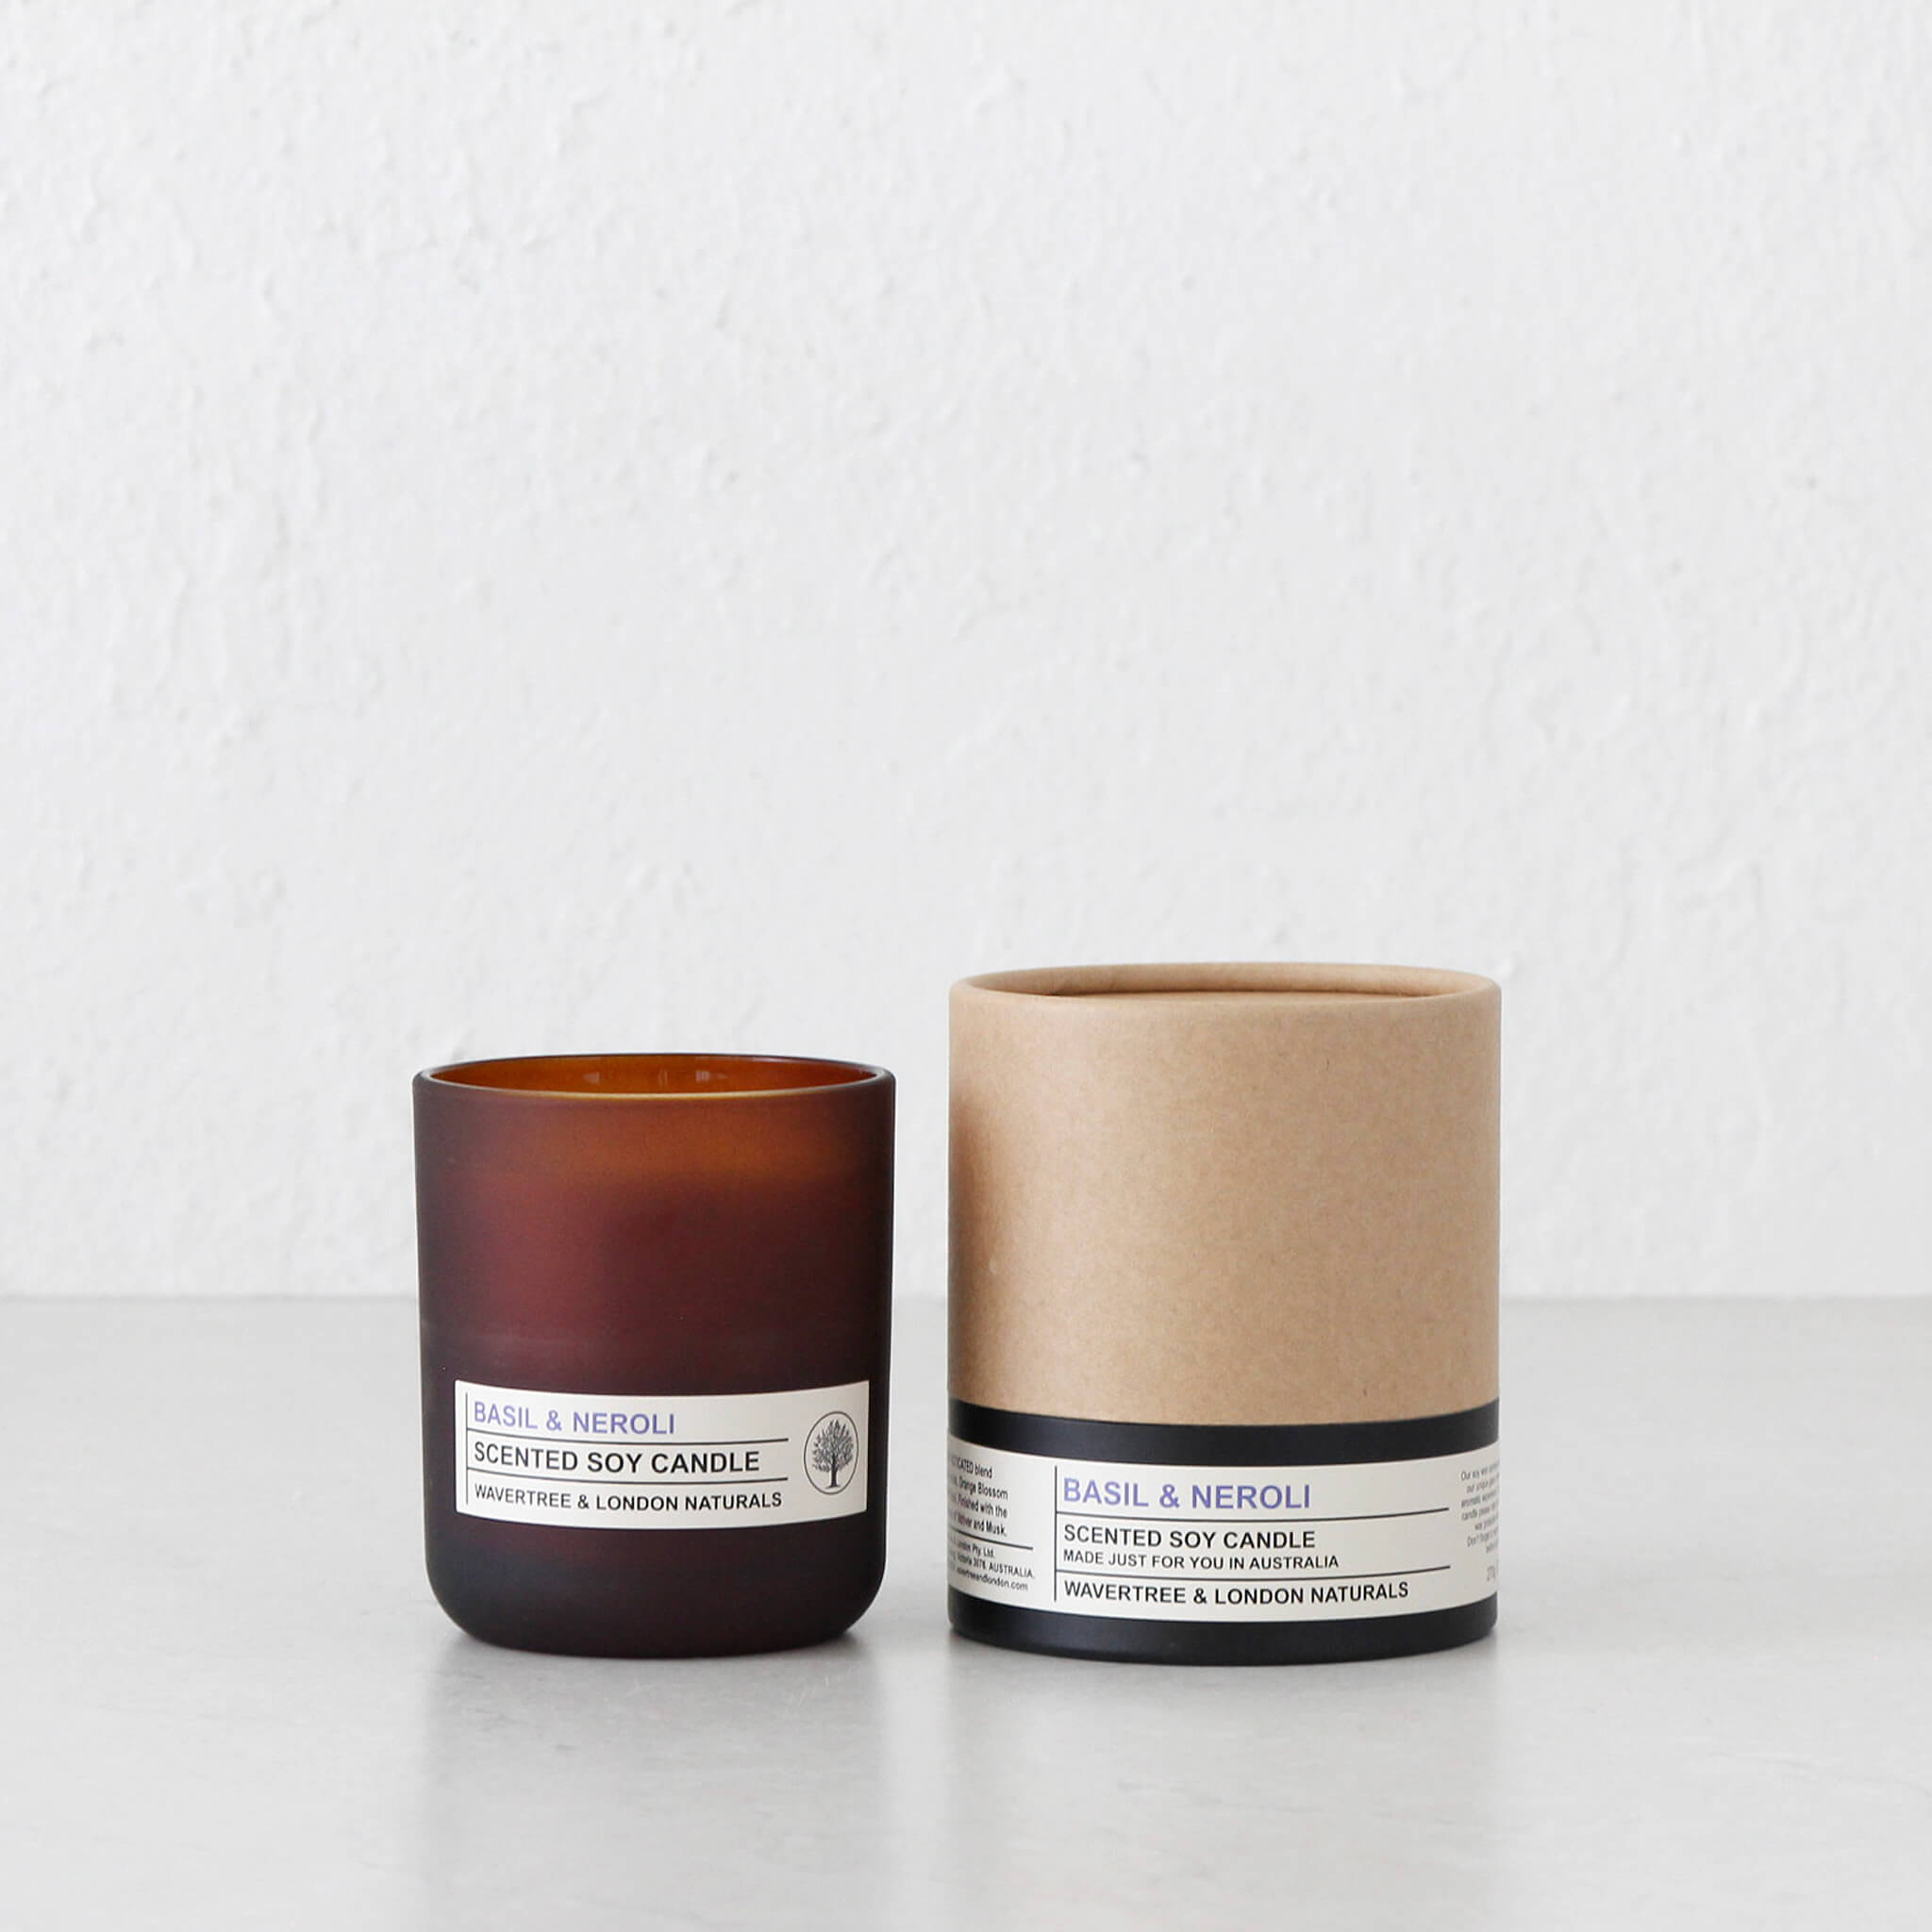 CANDLES + SCENTS